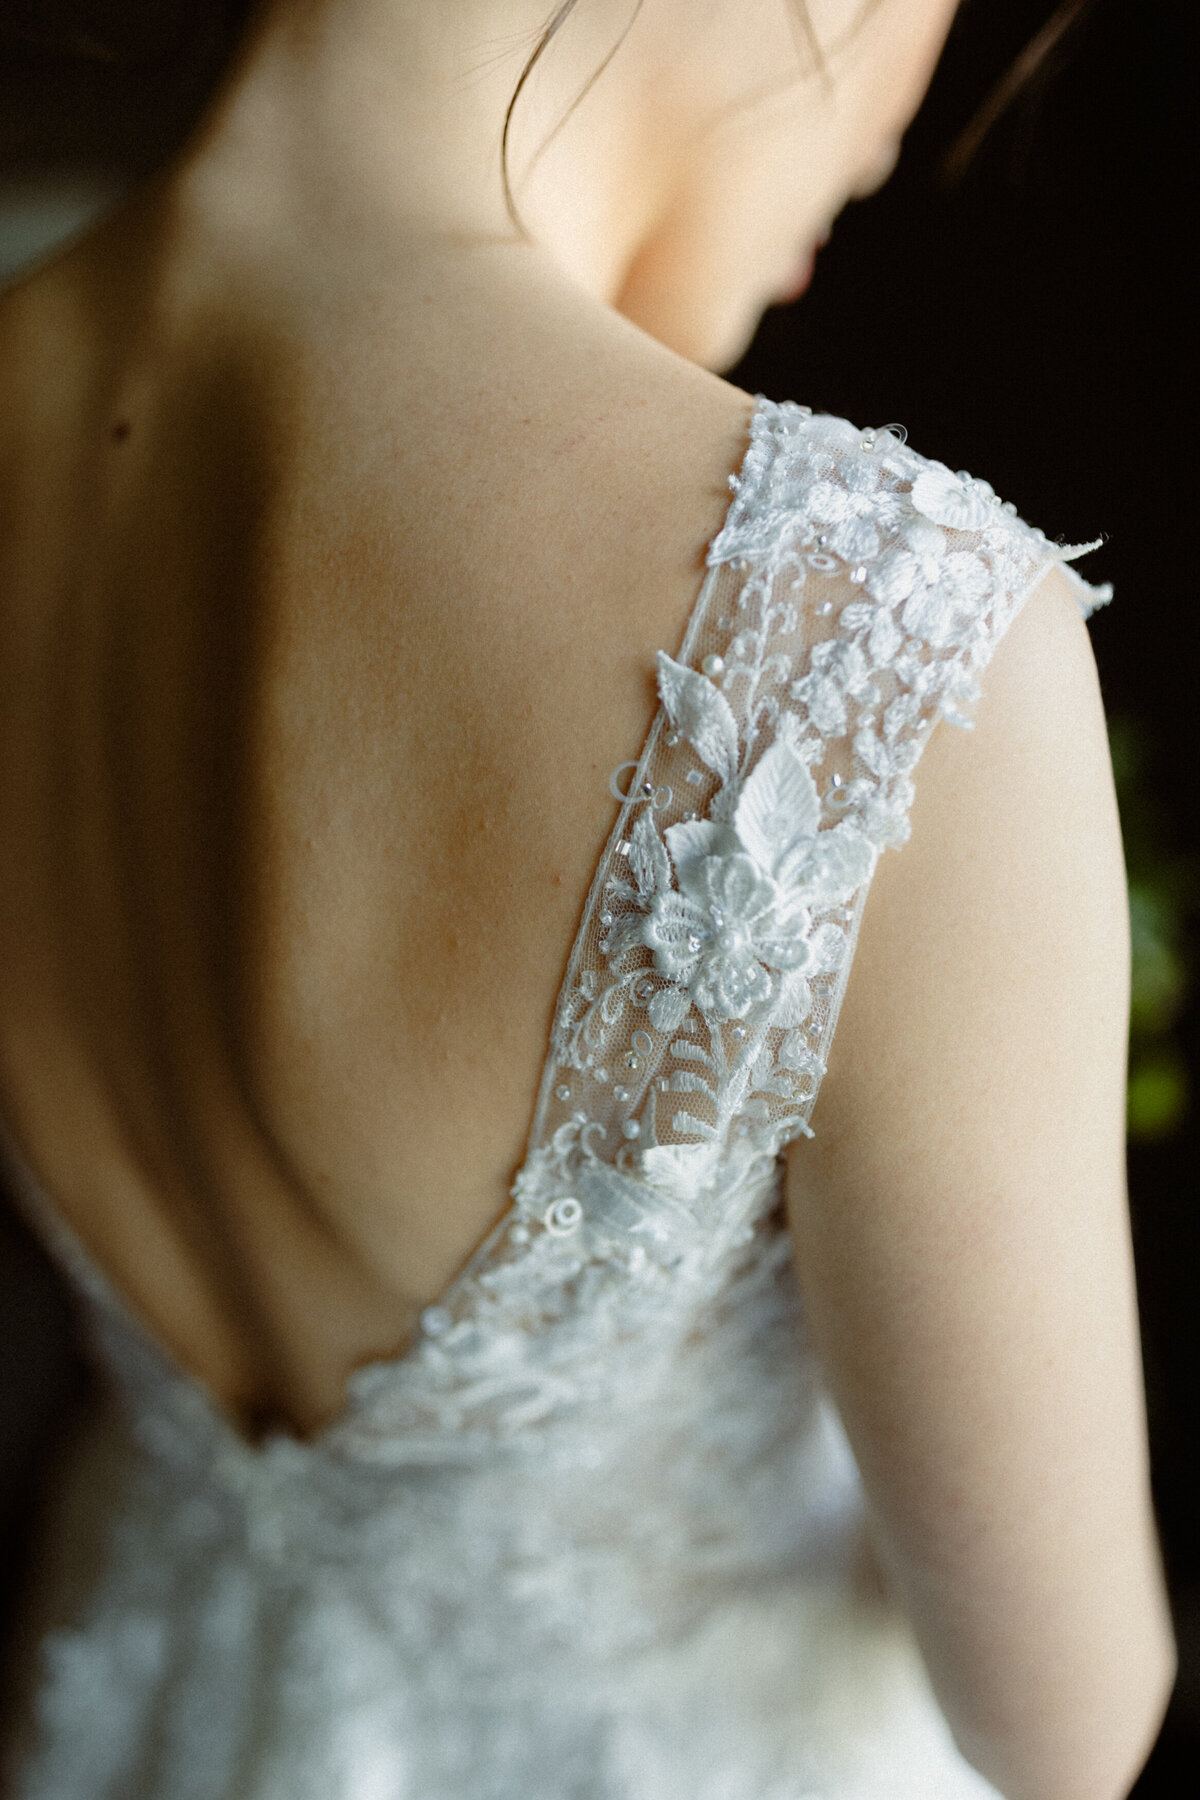 details-of-the-back-of-the-dress-of-a-bride-on-a-contrasting-dark-background-1